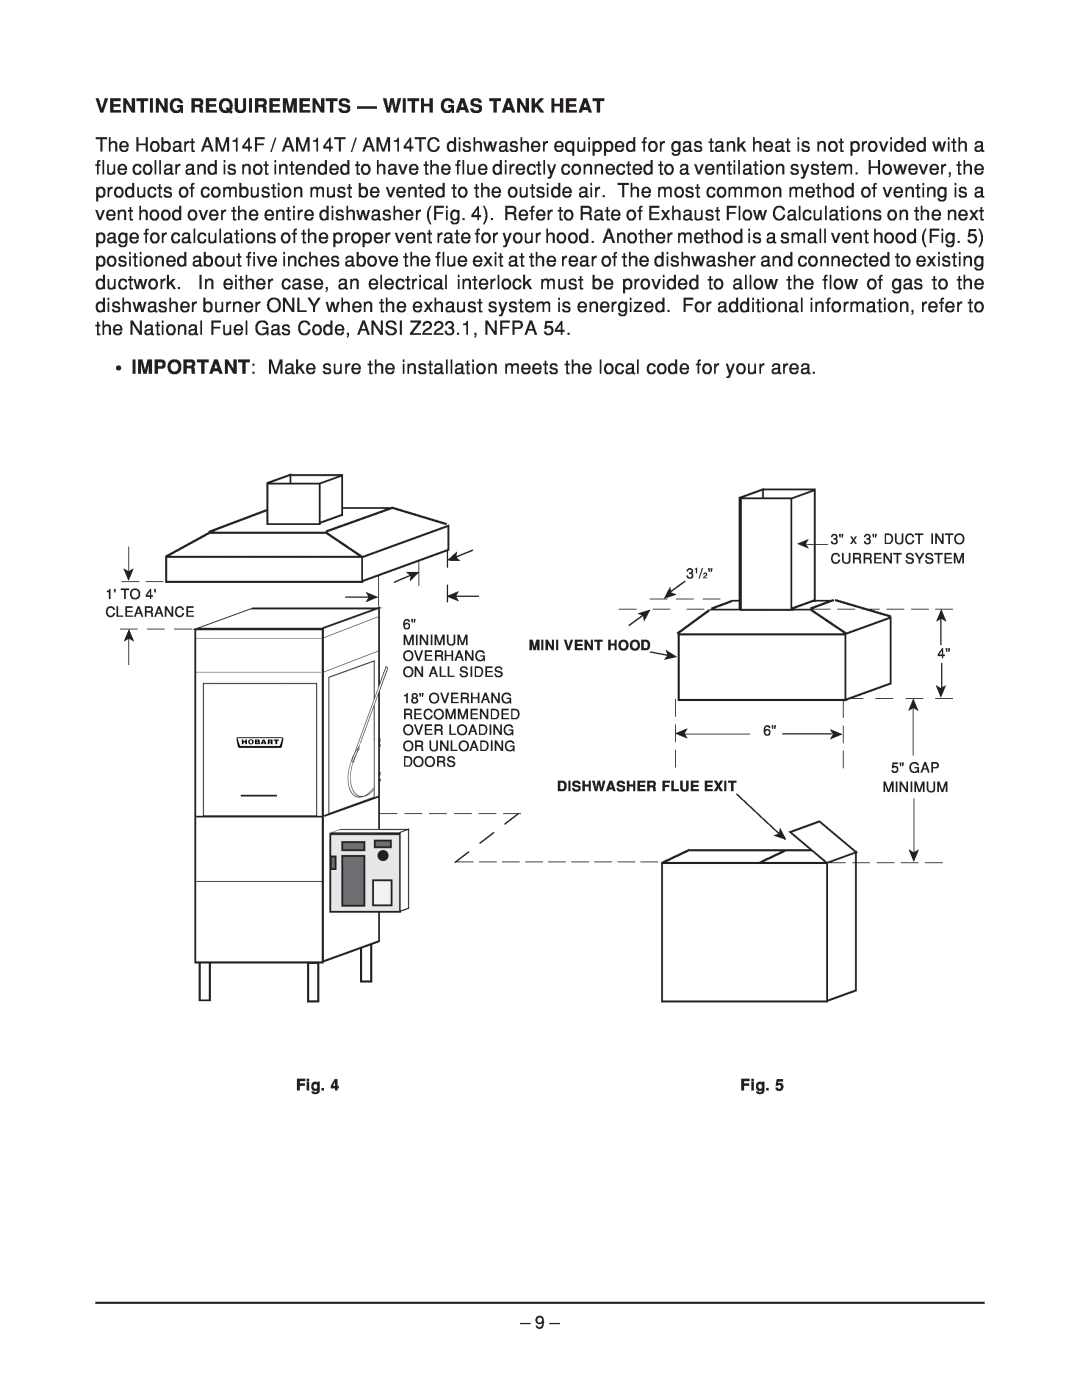 Hobart AM14T, ML-110975, ML-110973, AM14F Venting Requirements - With Gas Tank Heat, Mini Vent Hood, Dishwasher Flue Exit 